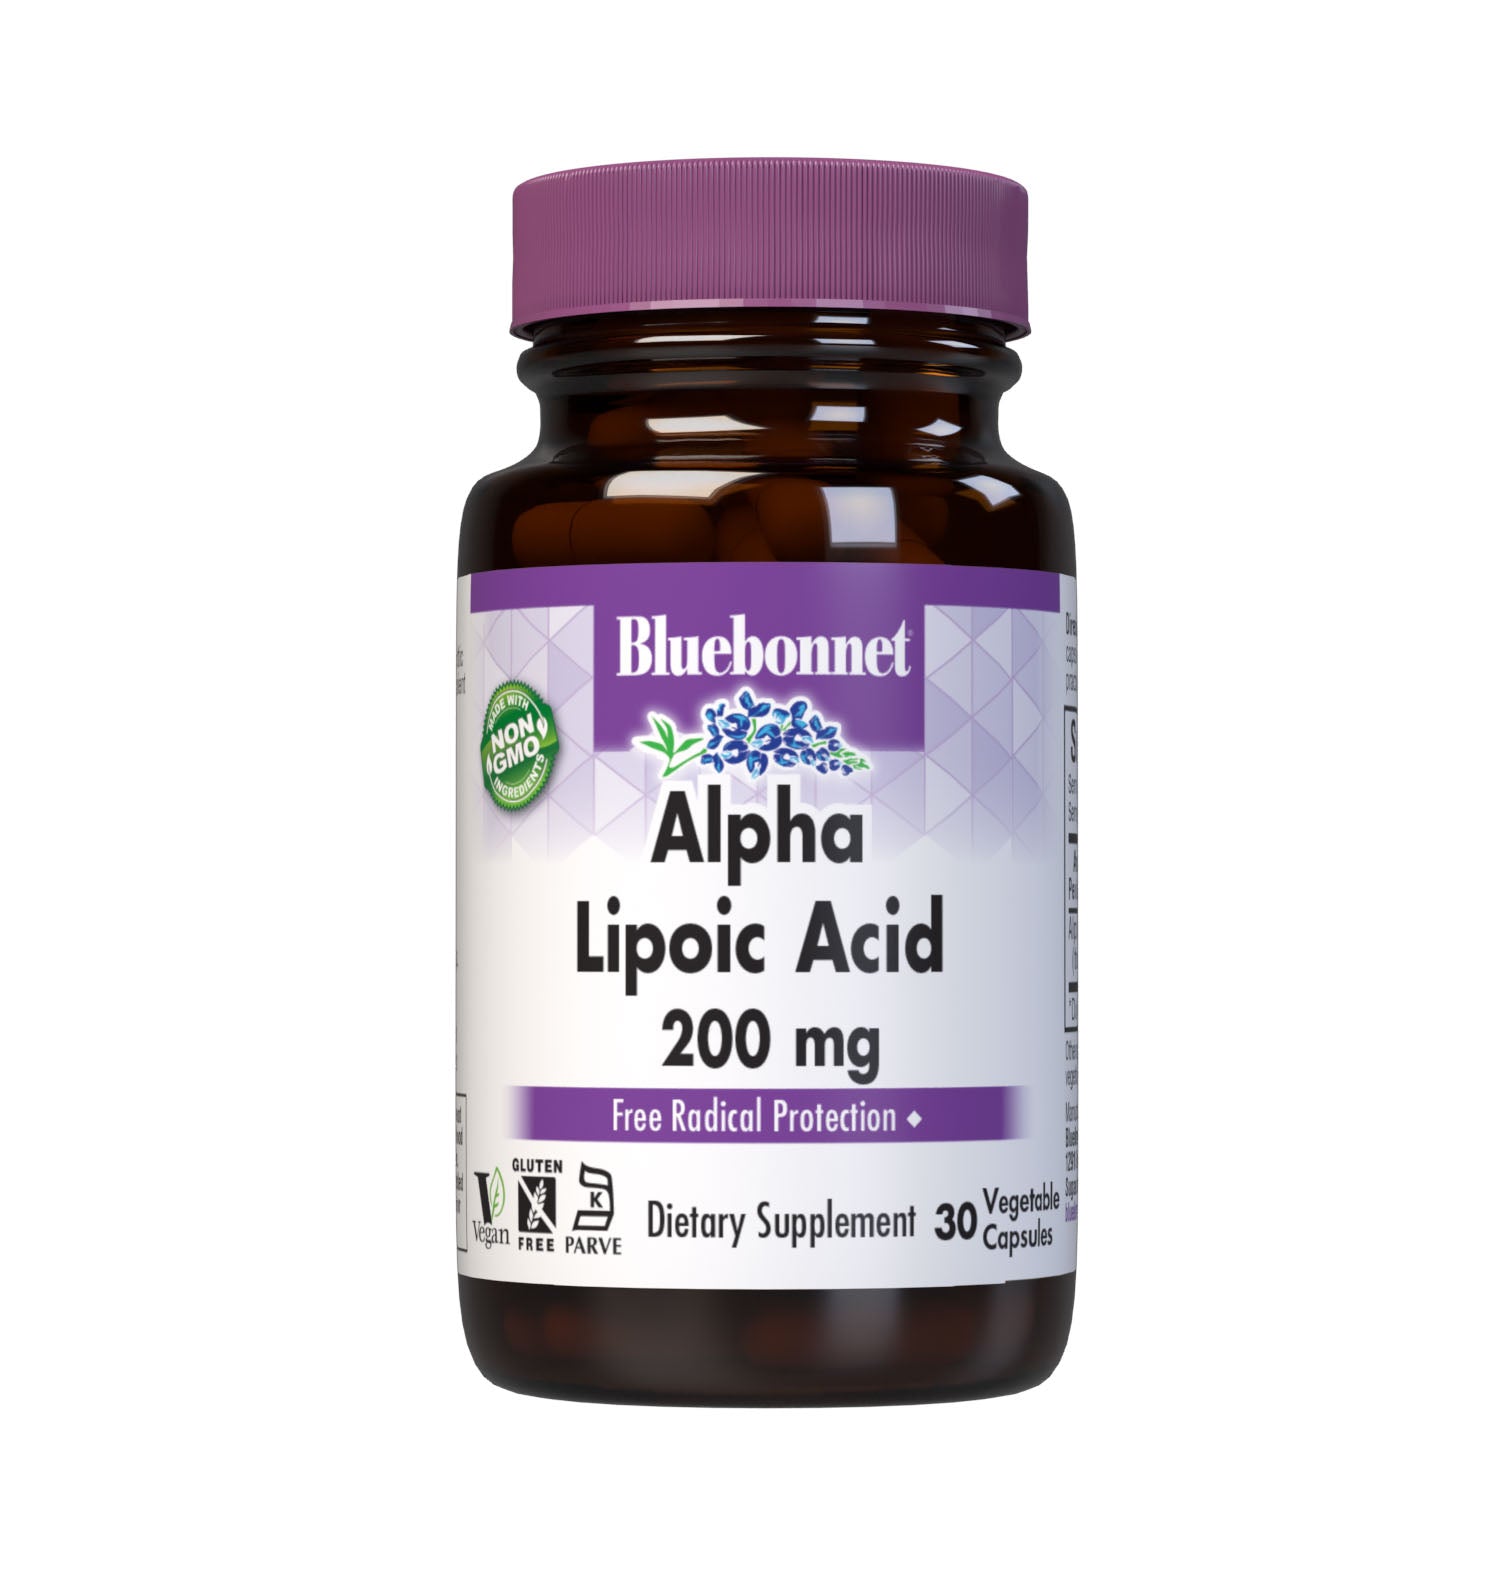 Bluebonnet’s Alpha Lipoic Acid 200 mg 30 Vegetable Capsules are formulated with alpha lipoic acid from thiotic acid. Alpha lipoic acid is a unique antioxidant that is both fat-soluble and water-soluble, and is known for its free radical scavenger activity. #size_30 count